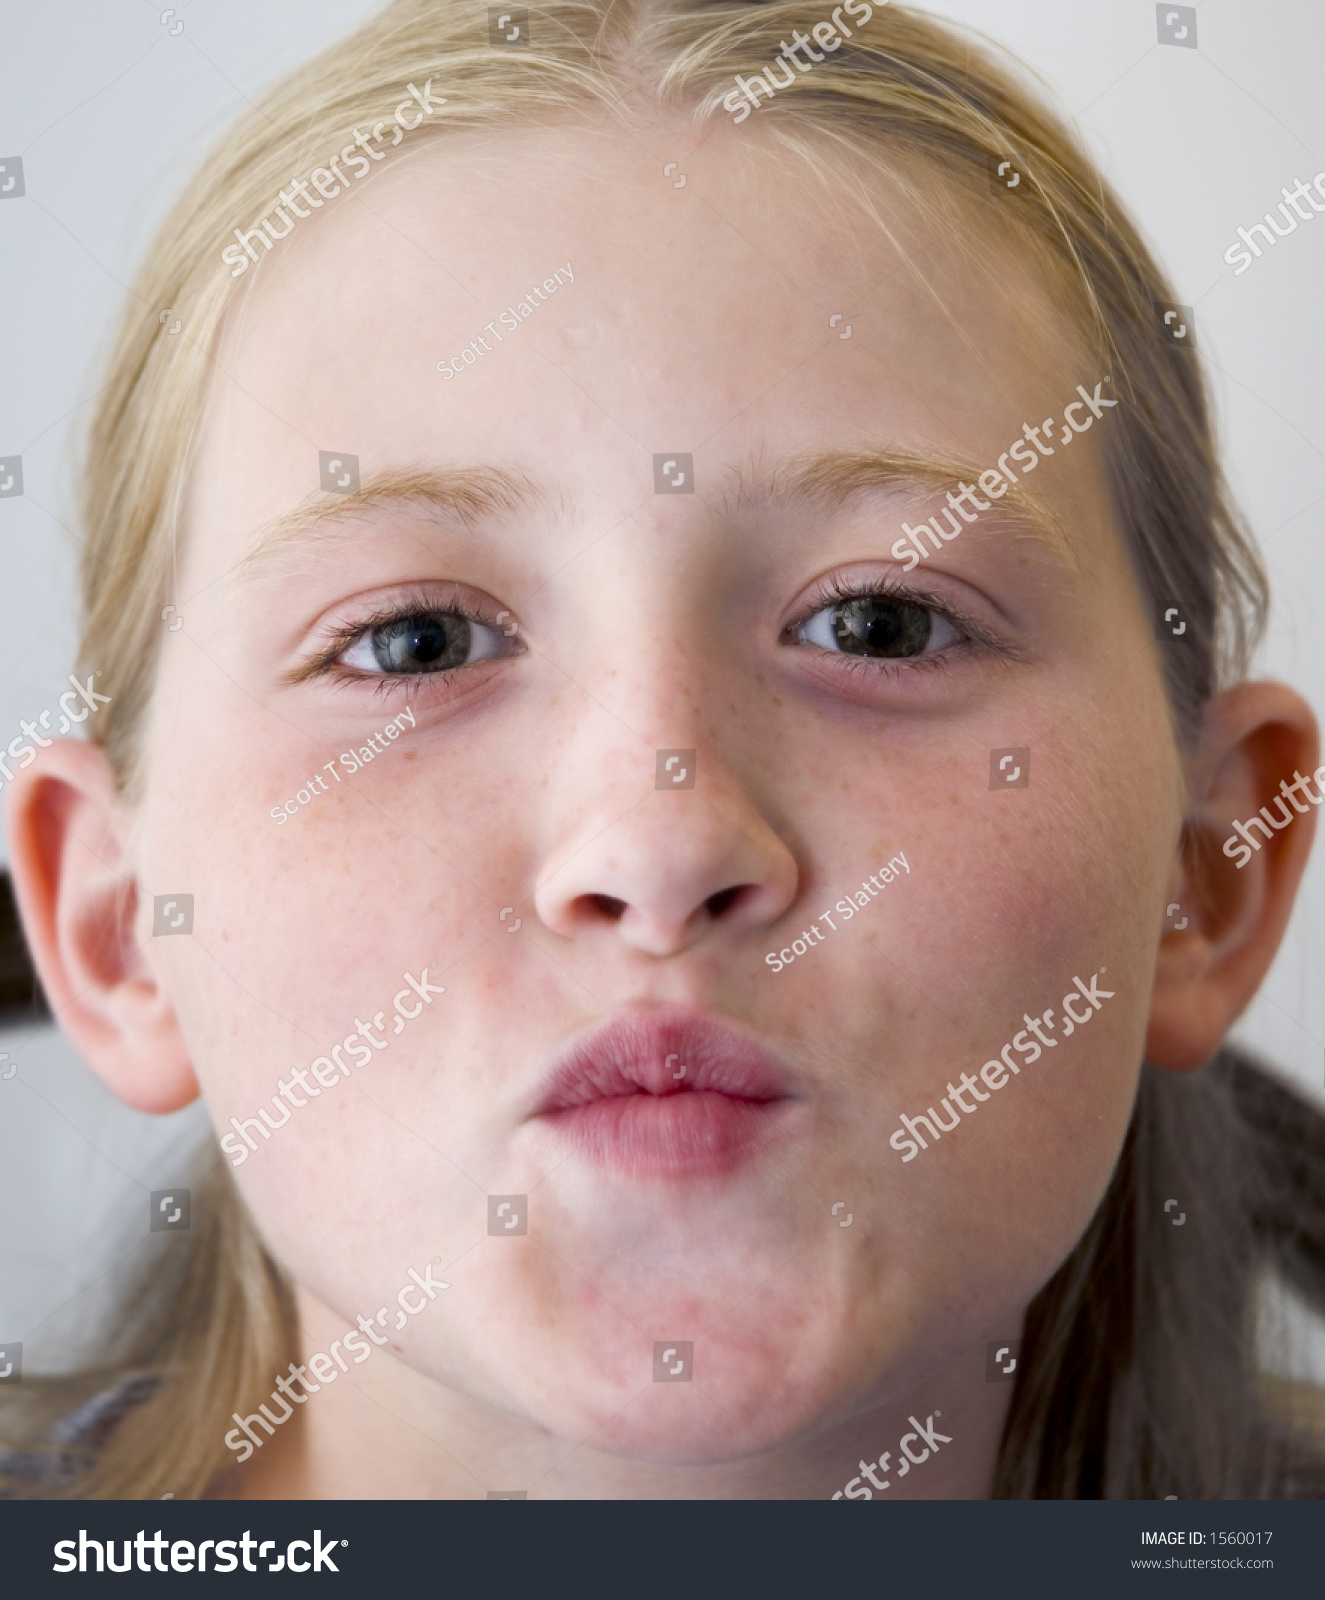 Gimme Kiss Stock Photo (Royalty Free) 1560017 - Shutterstock